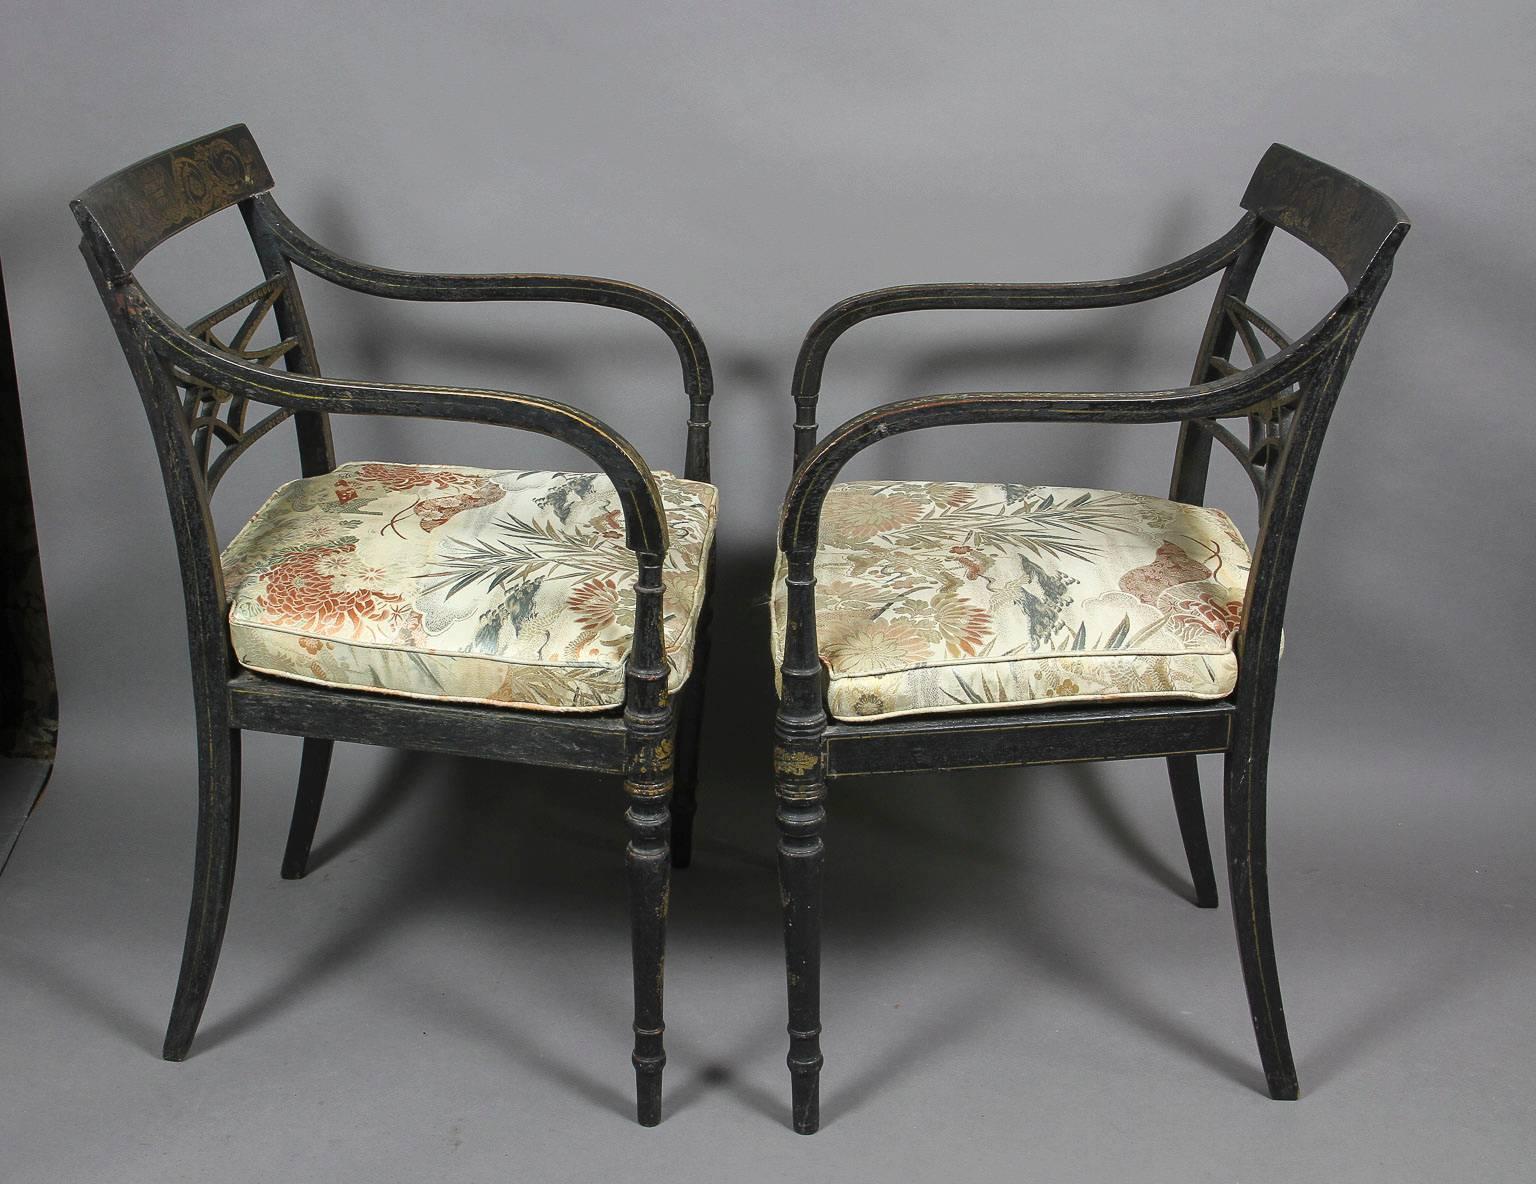 English Pair of Regency Ebonized and Gilded Armchairs